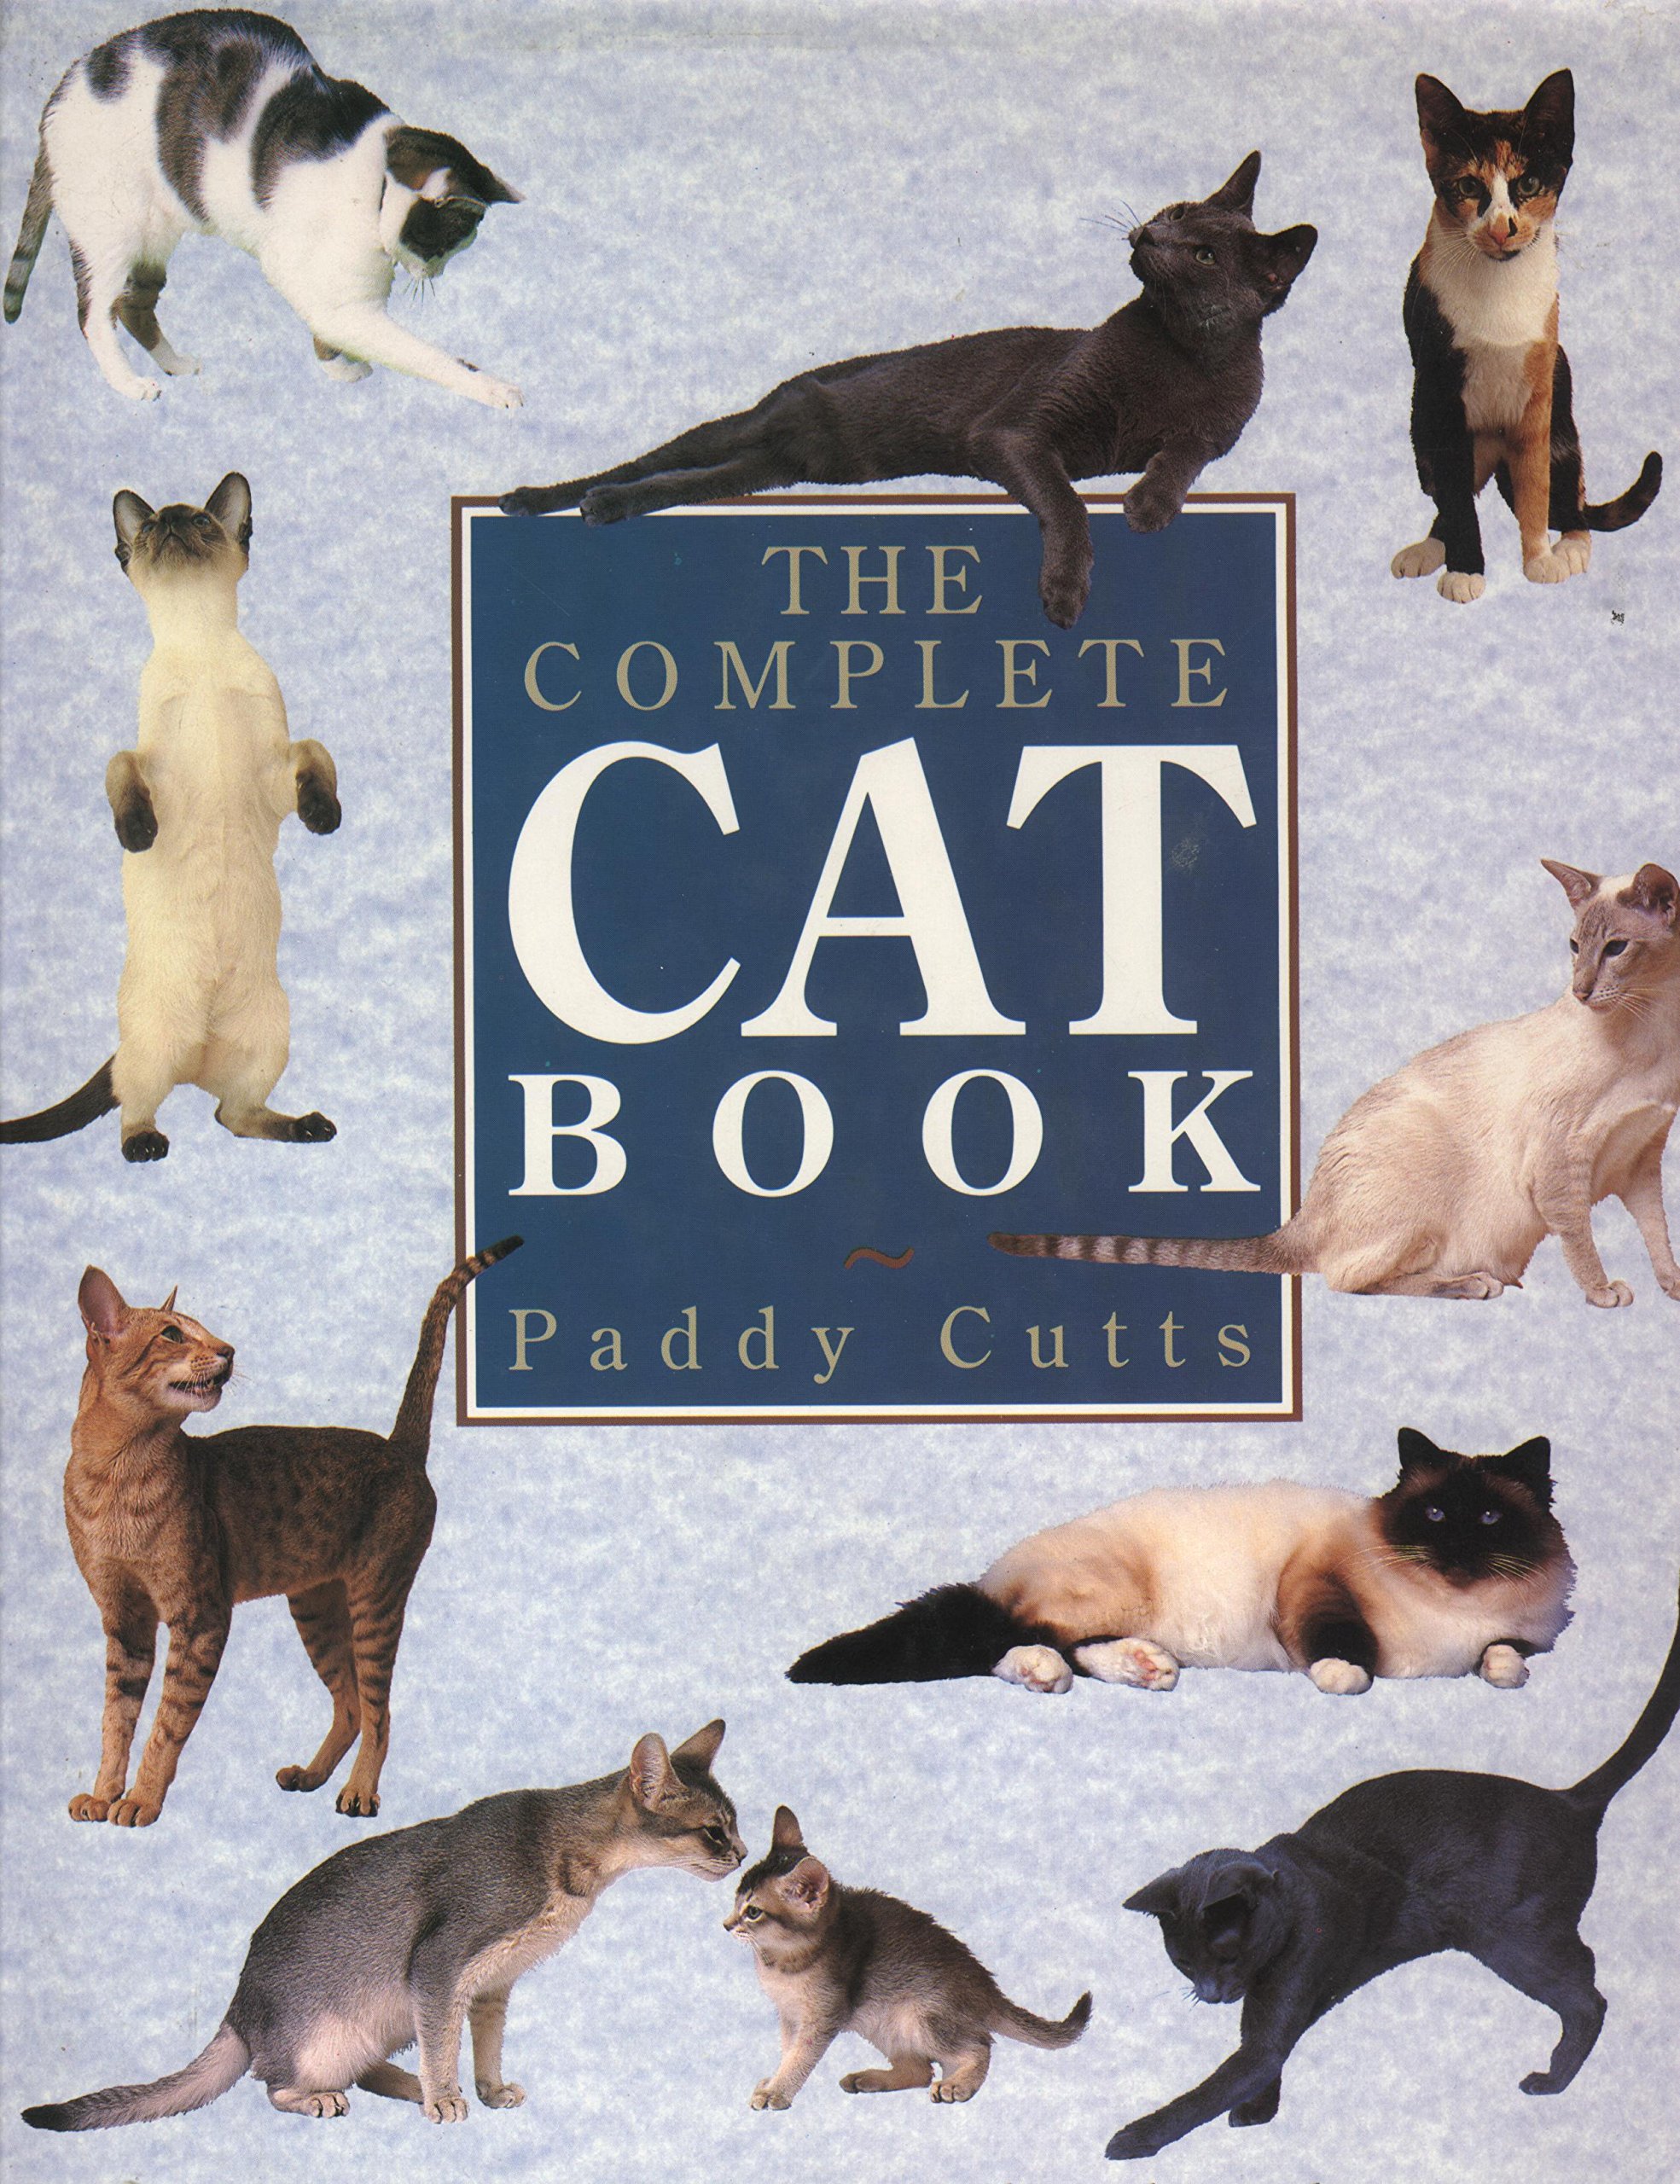 The complete cat book